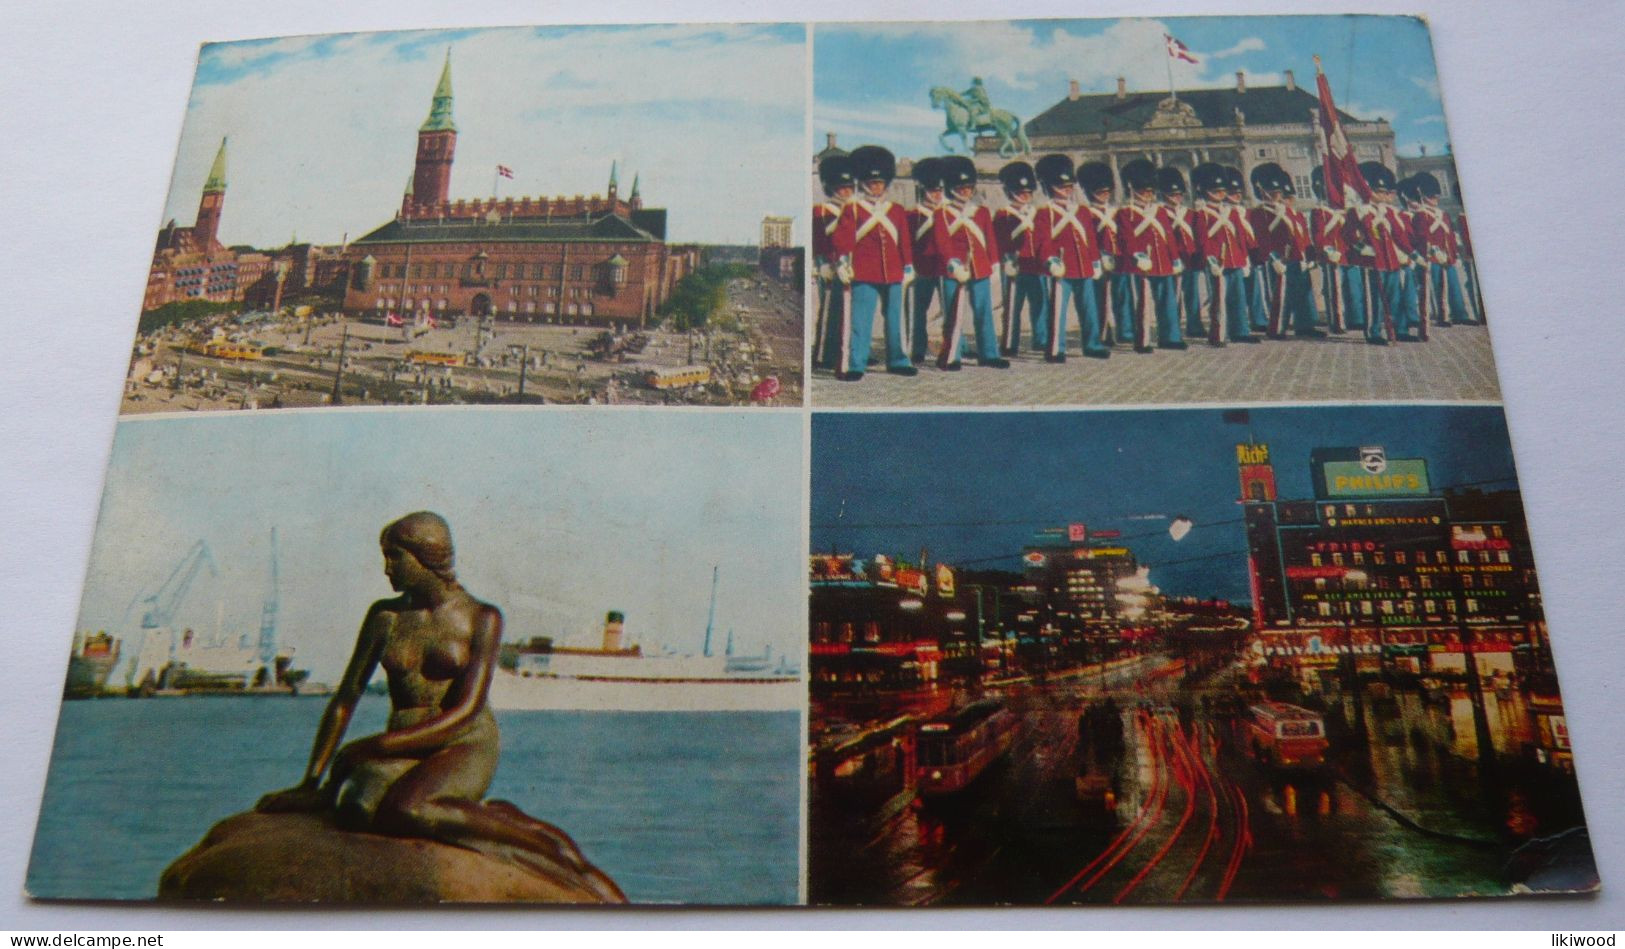 Copenhagen, København  - The City Hall Square By Day And Night, The Little Mermaid, The Royal Guard - Denmark